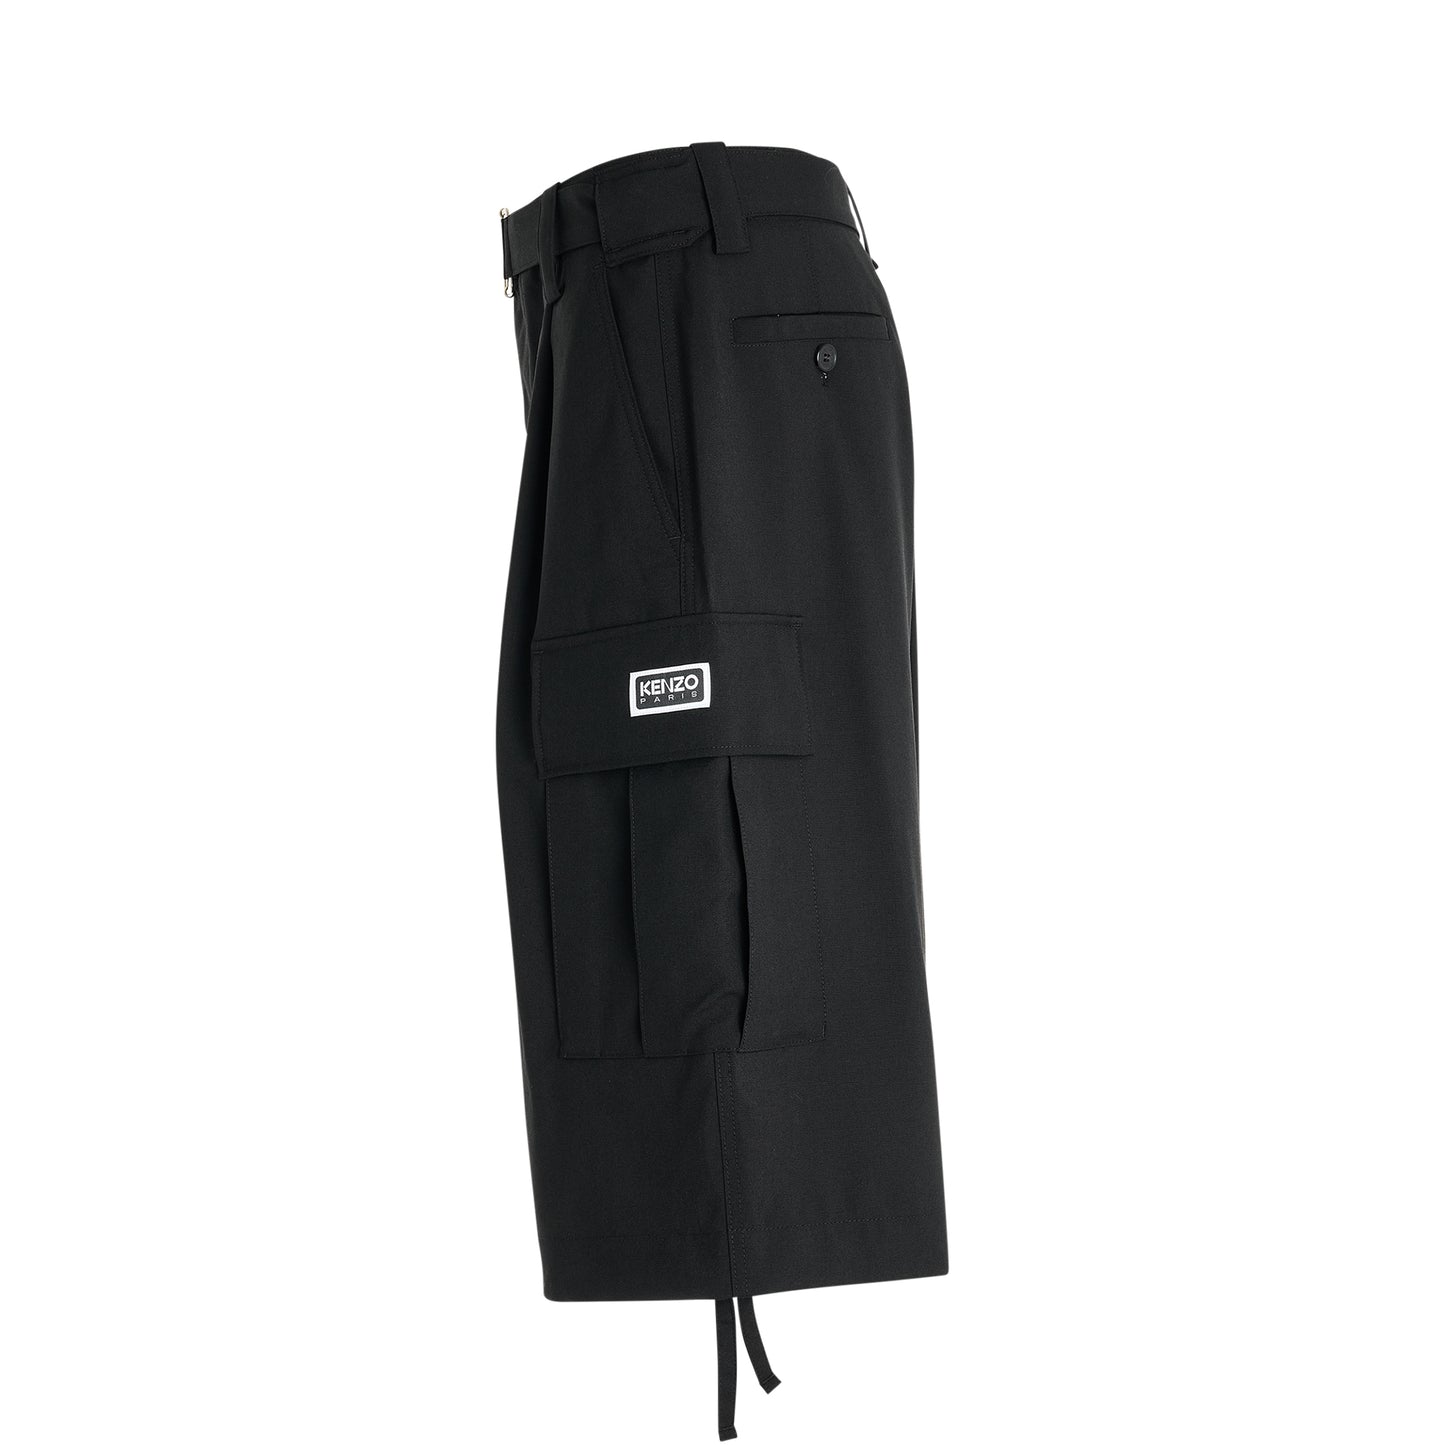 Cargo Tailored Shorts in Black